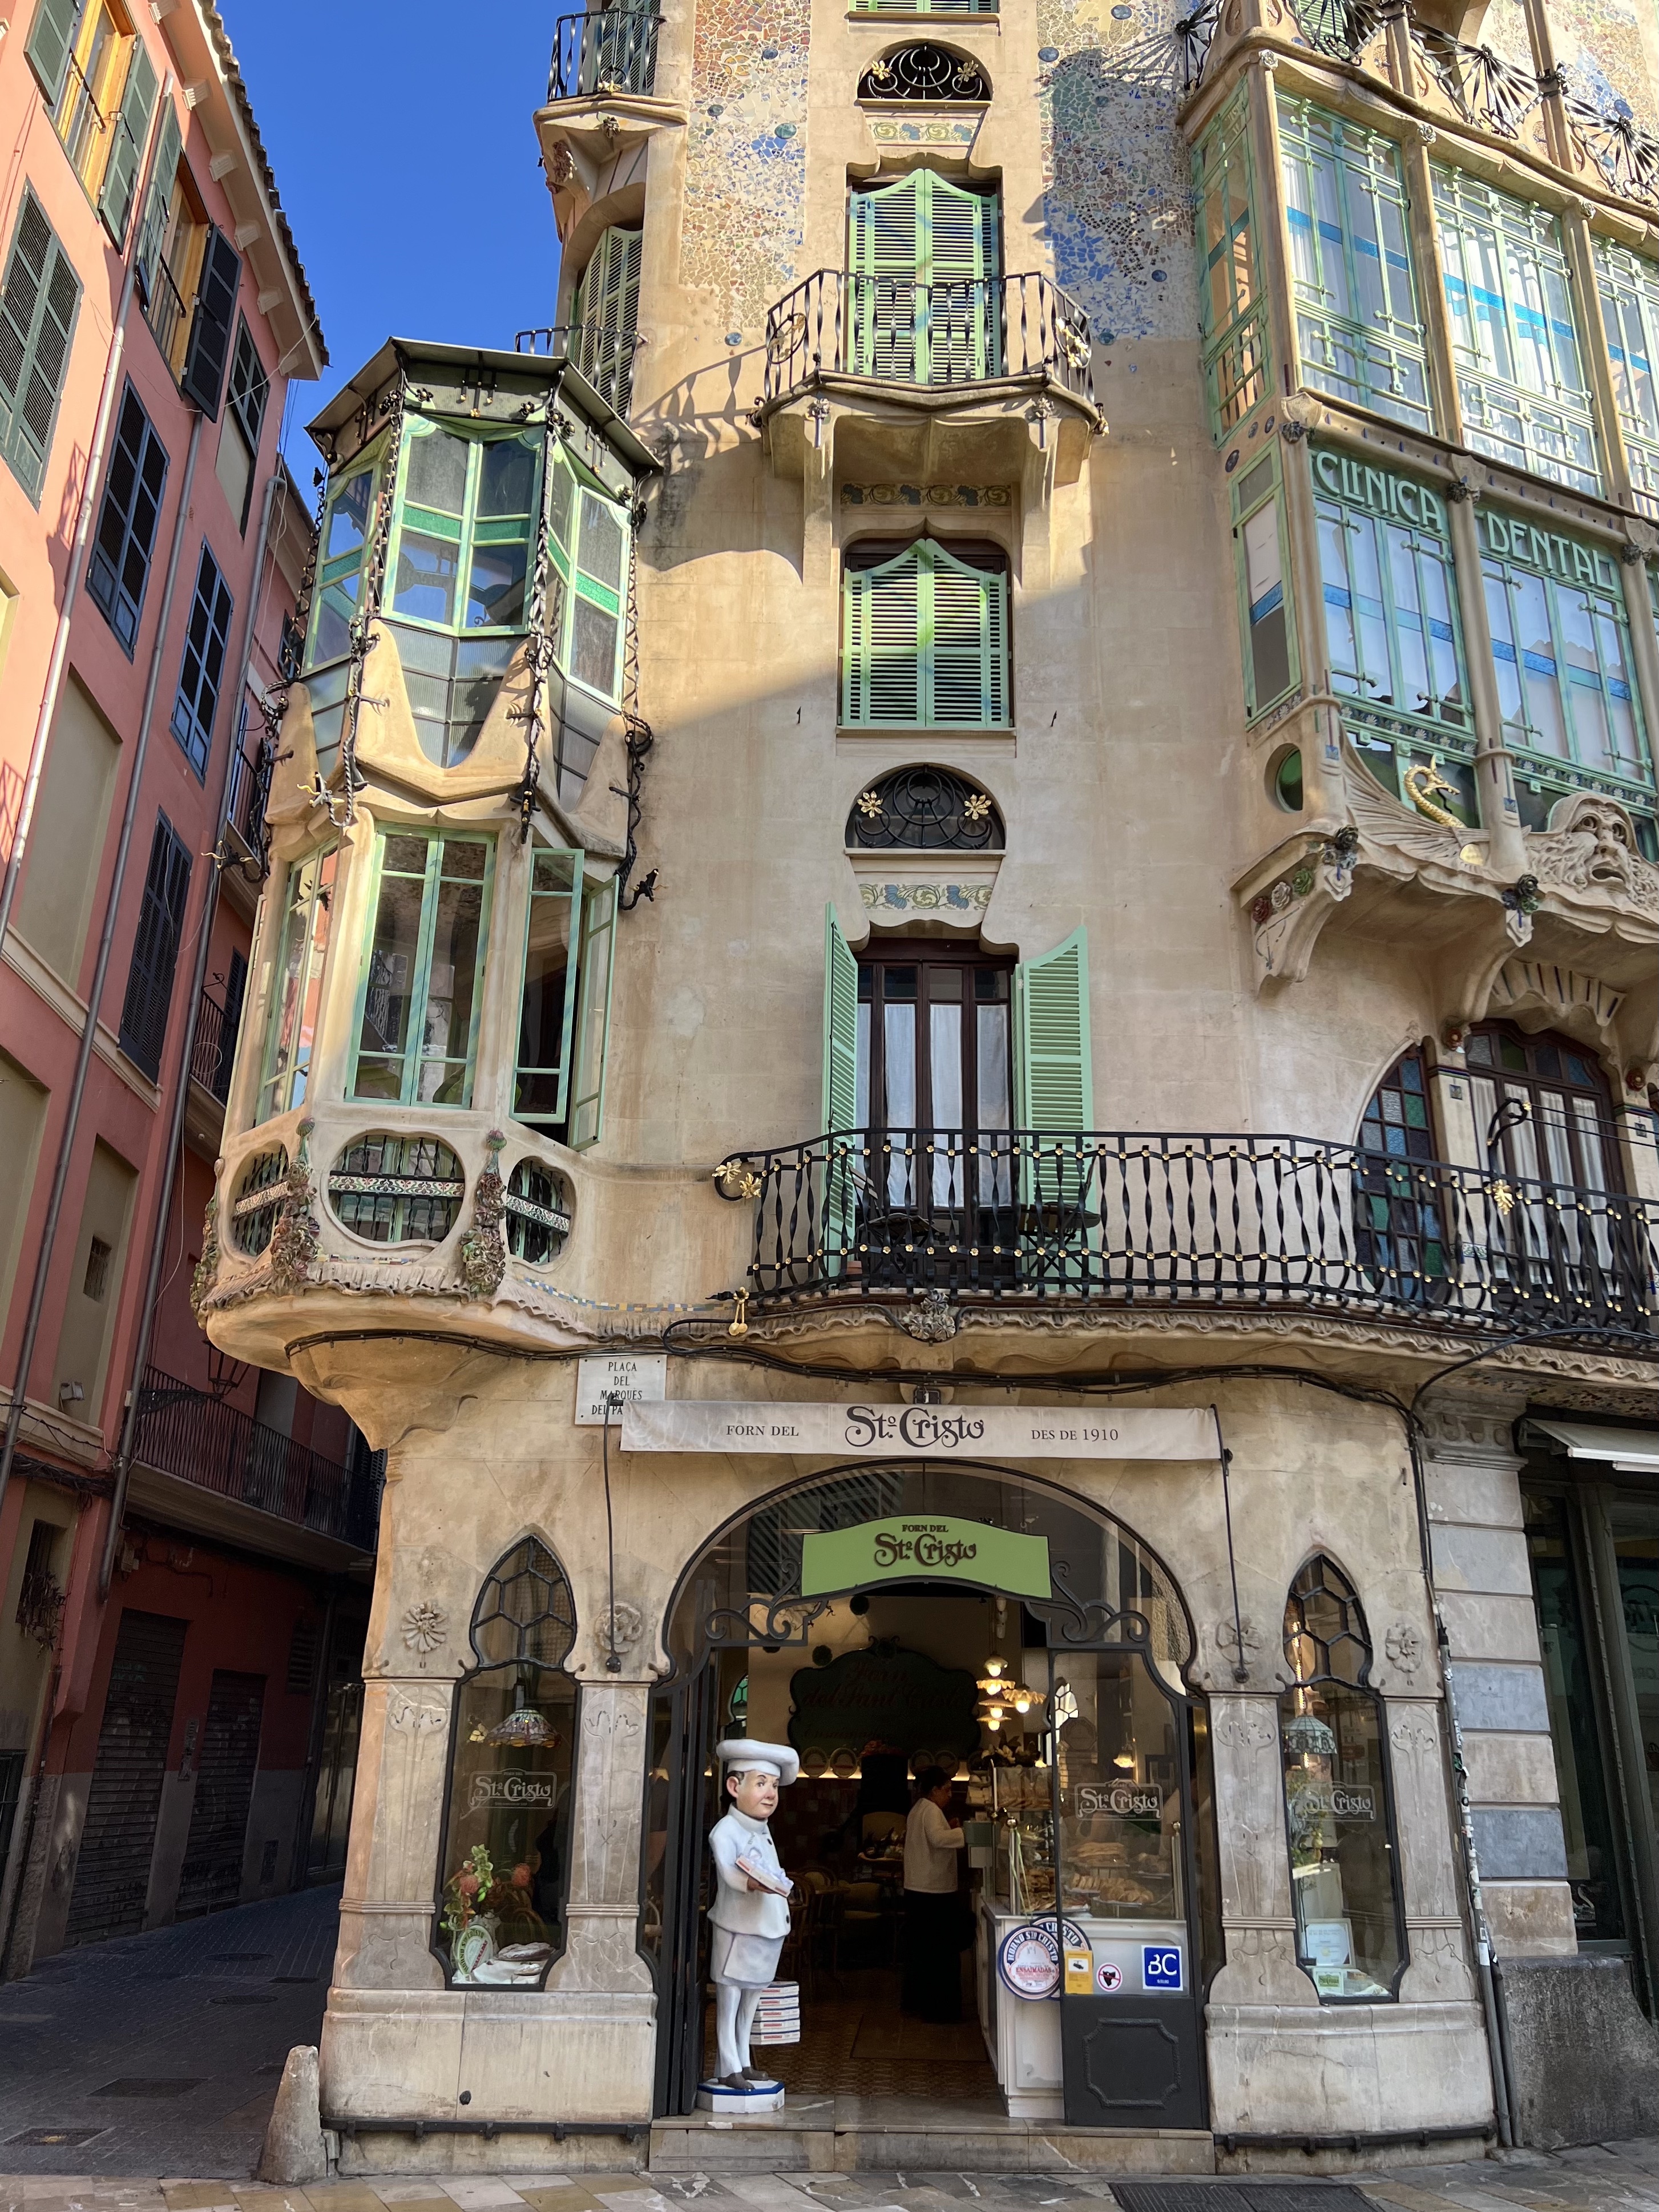 Head to Placa del Marques del Palmer in Plama to find this original beautiful old building! You can also grab some lovely pastries here at St Cristo!